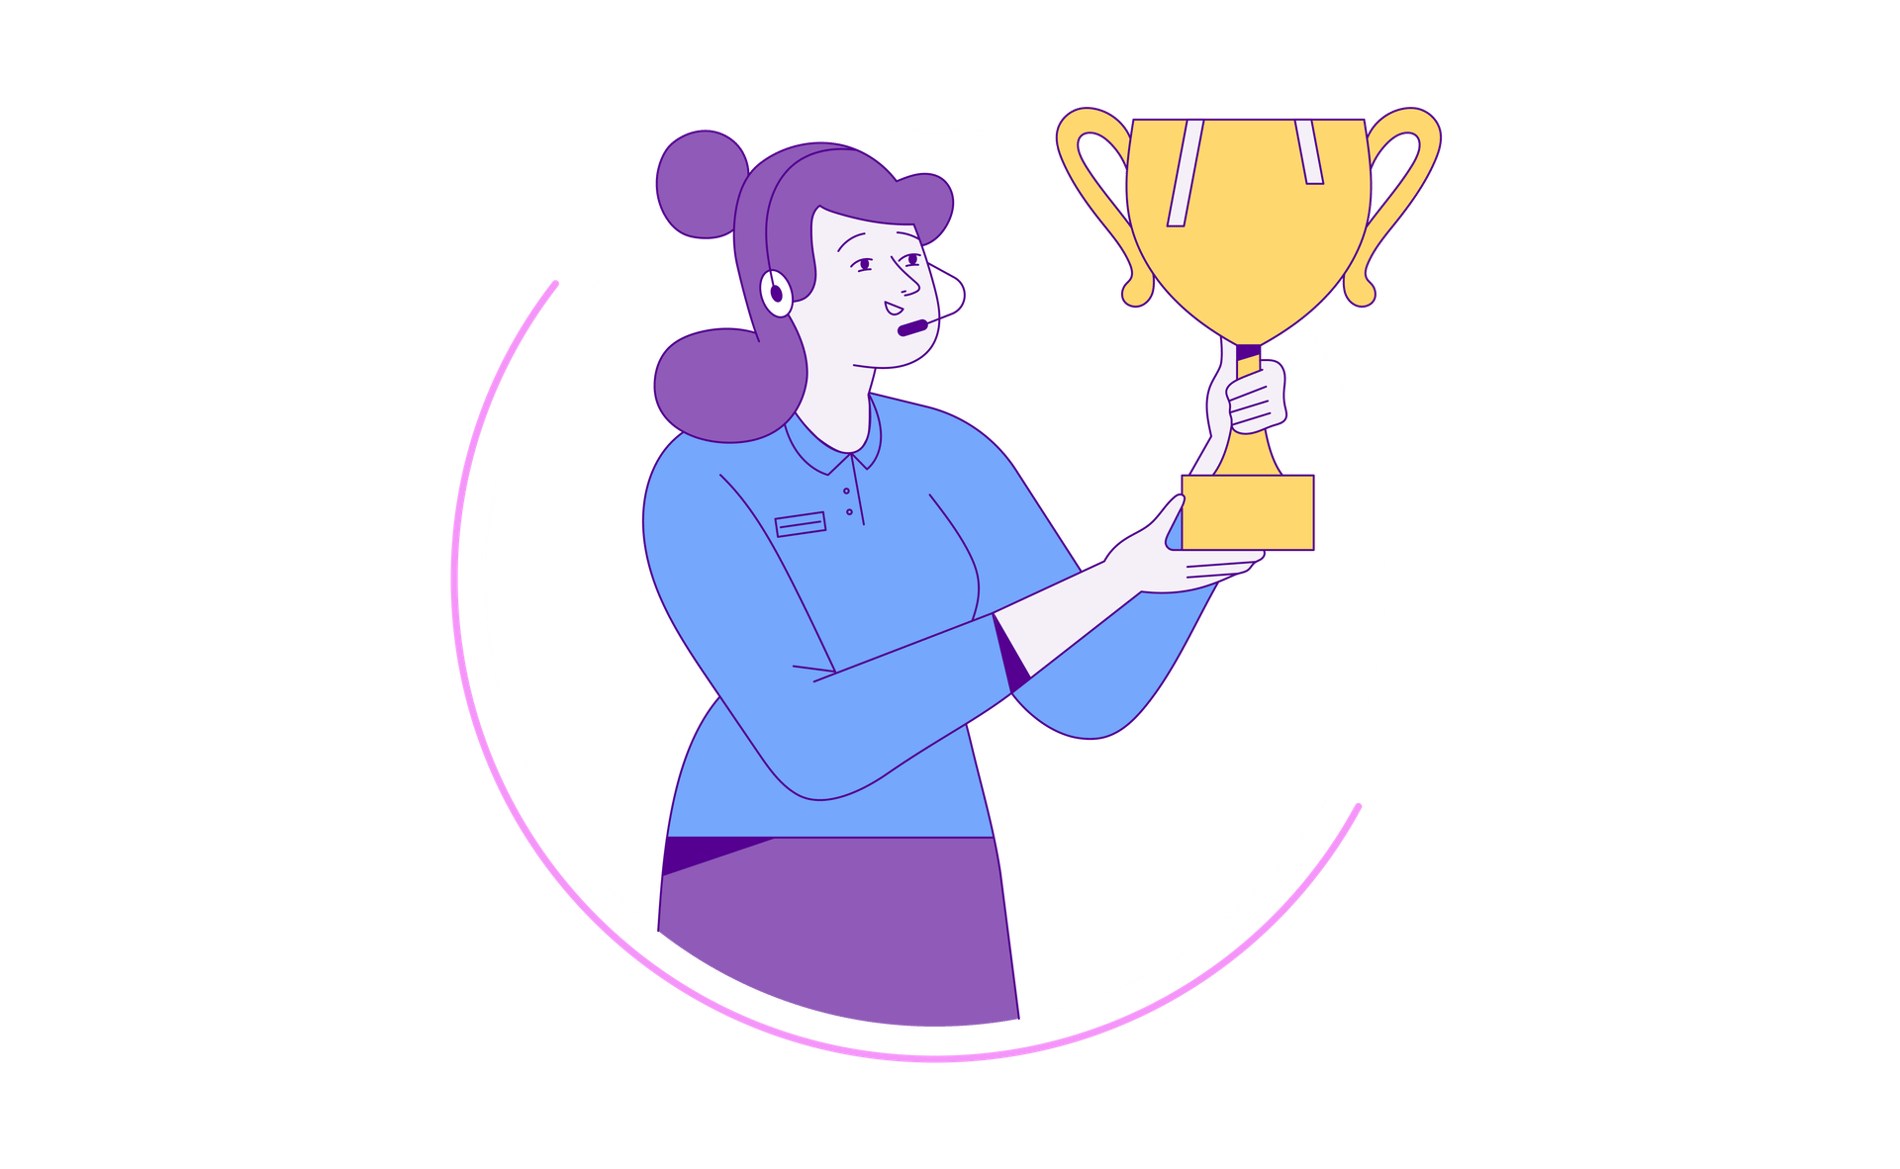 Illustration of a Woman holding an award won by UW